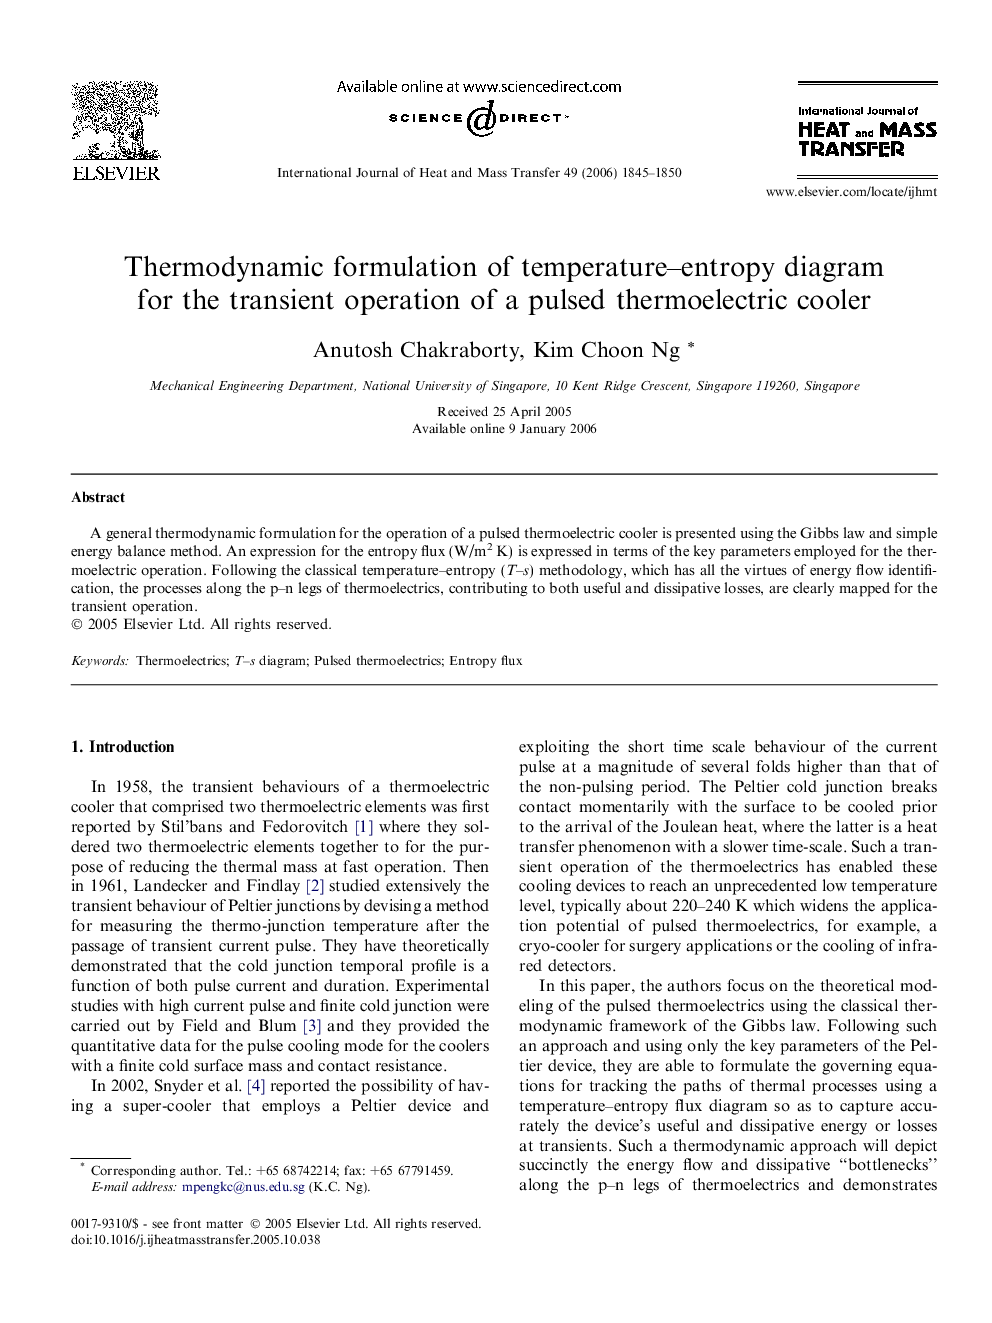 Thermodynamic formulation of temperature–entropy diagram for the transient operation of a pulsed thermoelectric cooler